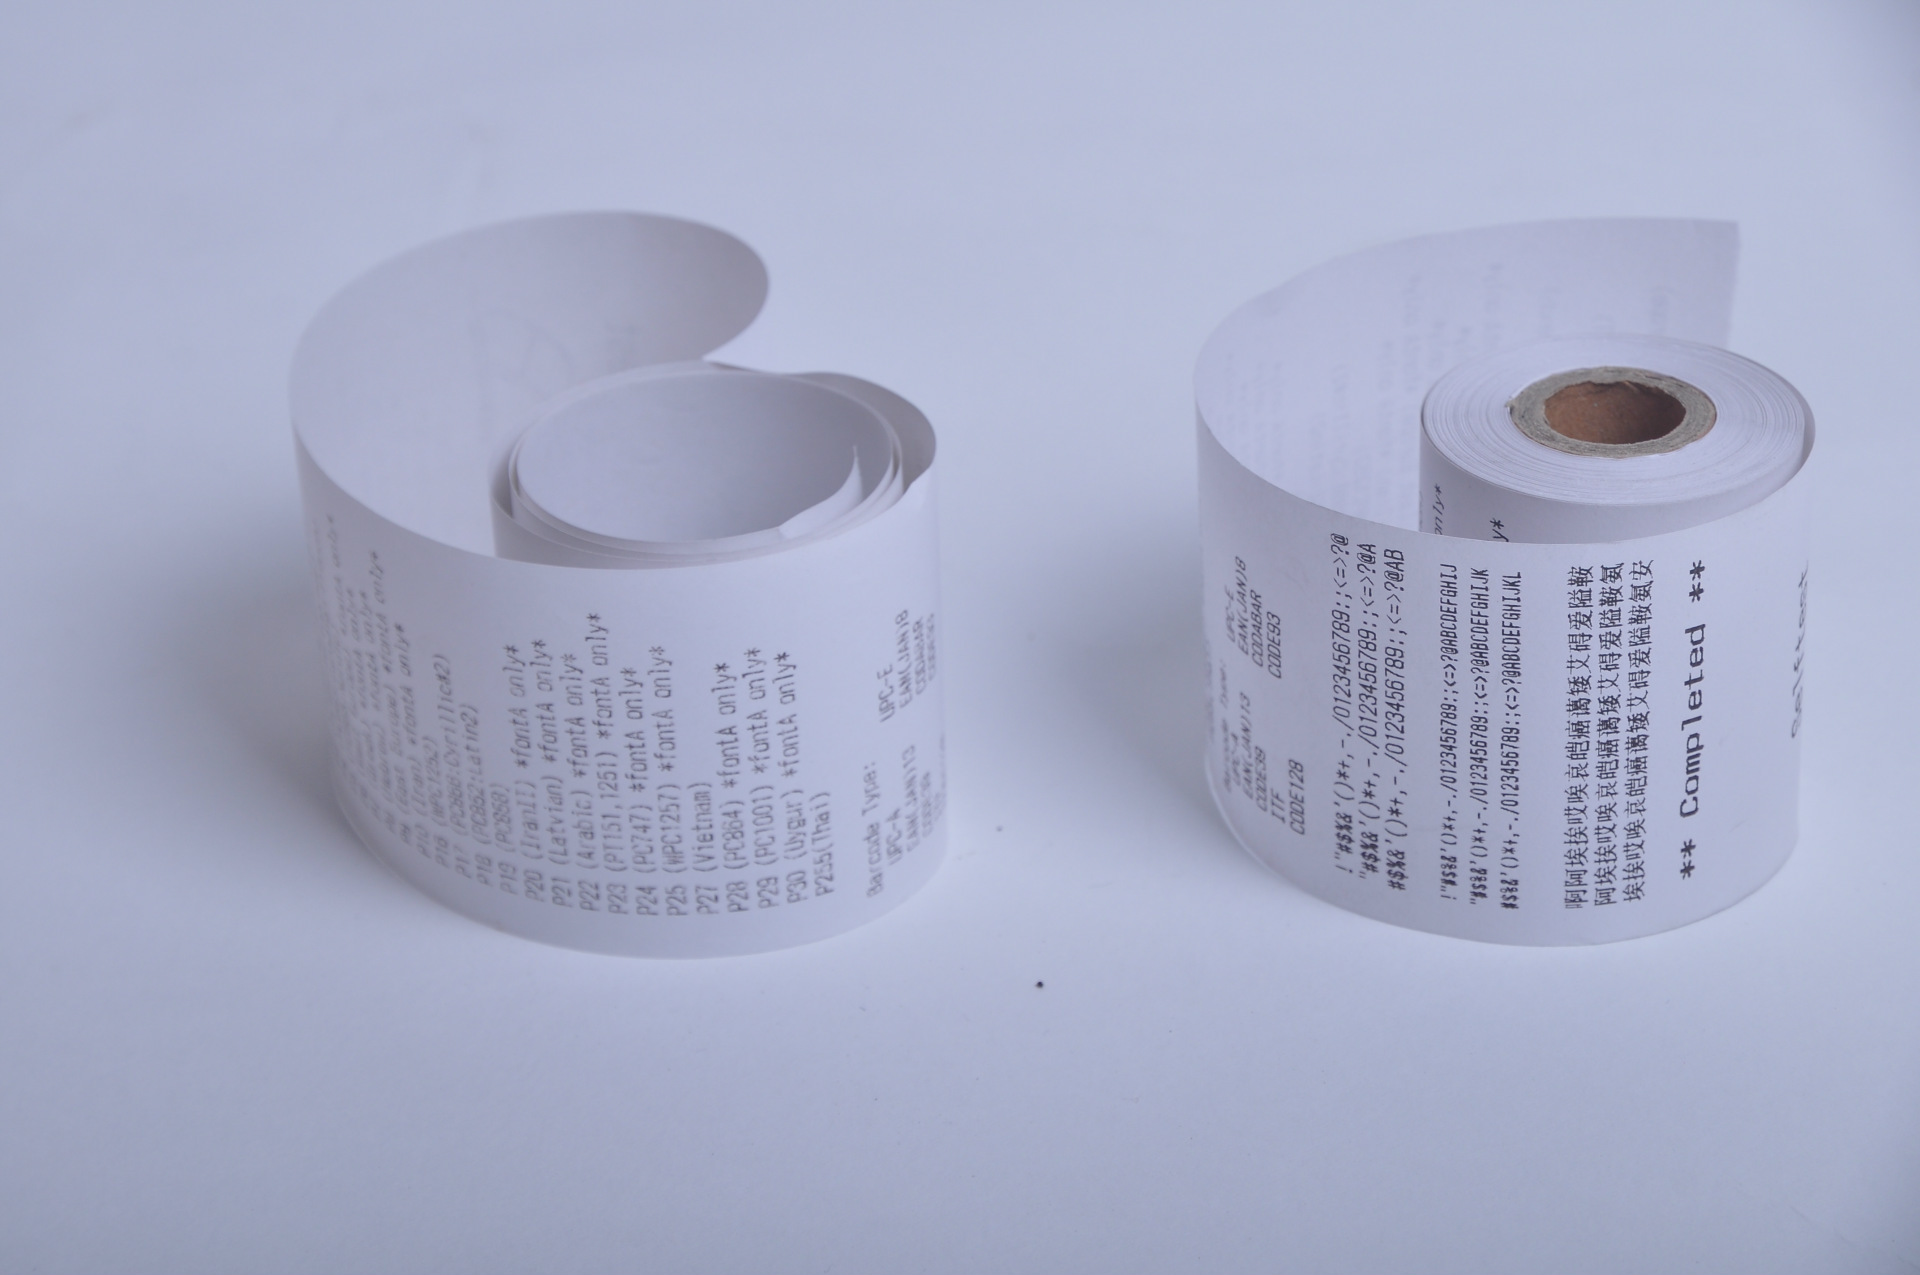 How to Identify Thermal Paper? -- Am I Using Thermal Paper?